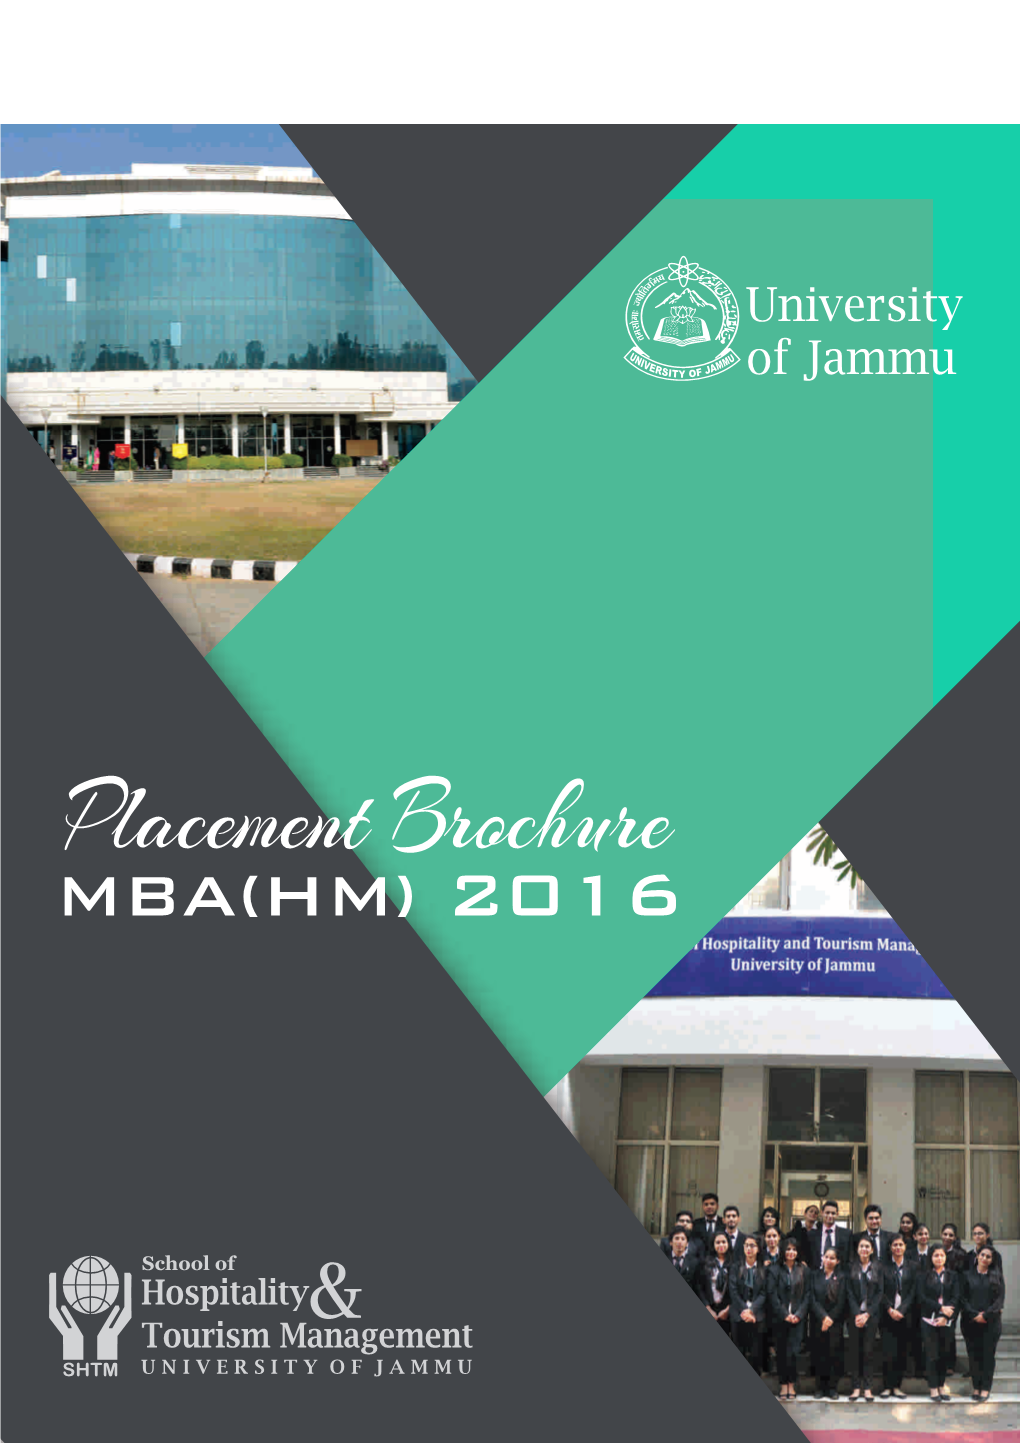 Placement Brochure MBA(HM) 2016